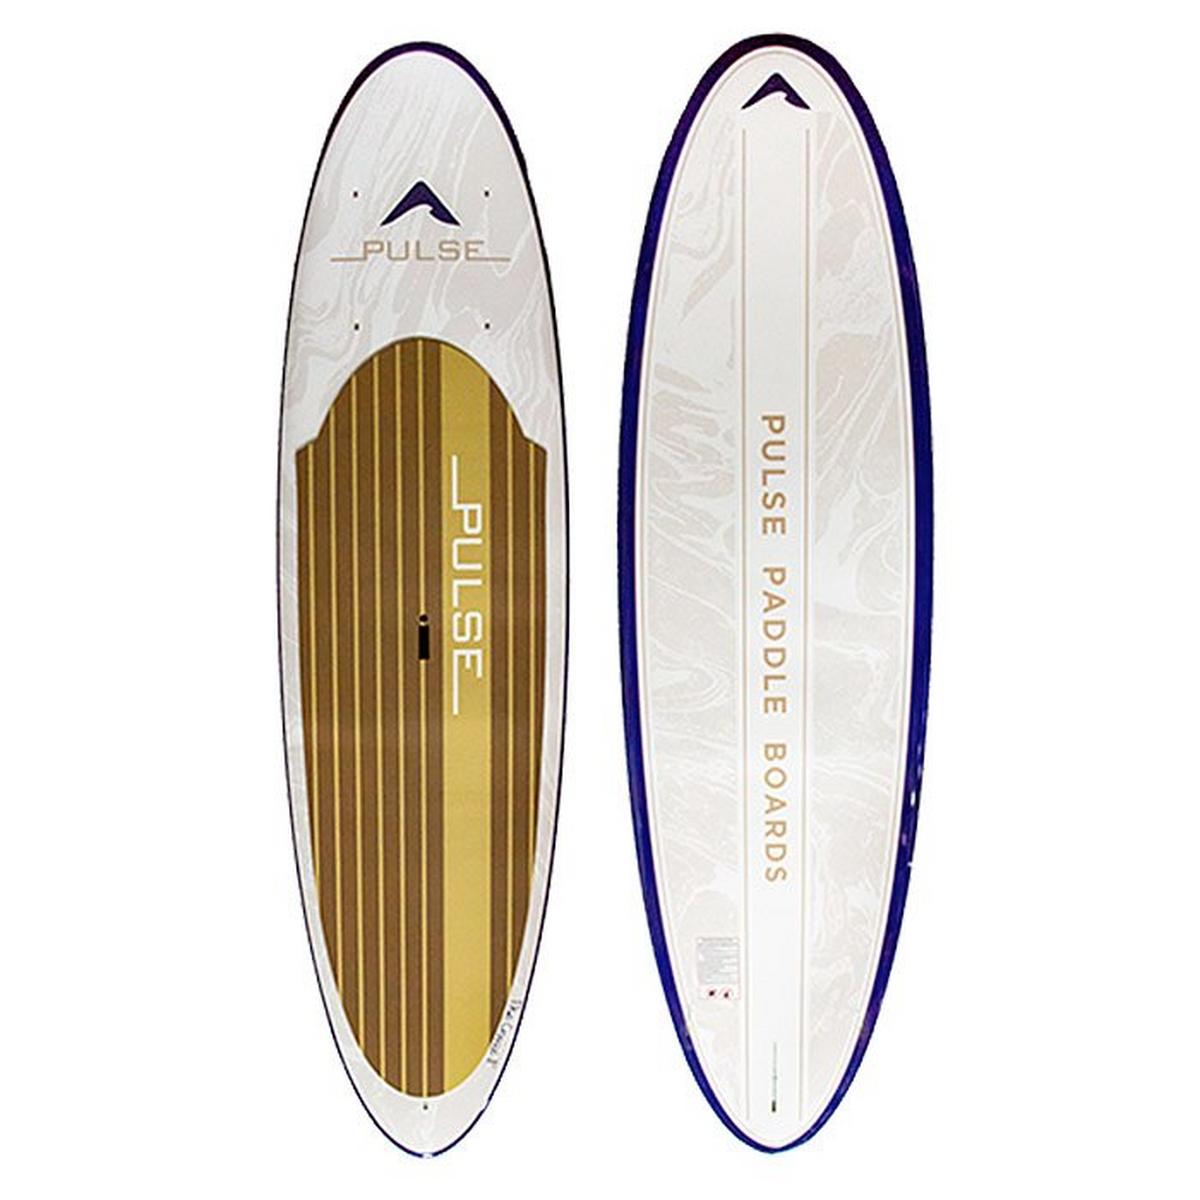 The Cruise RecTech Stand Up Paddleboard